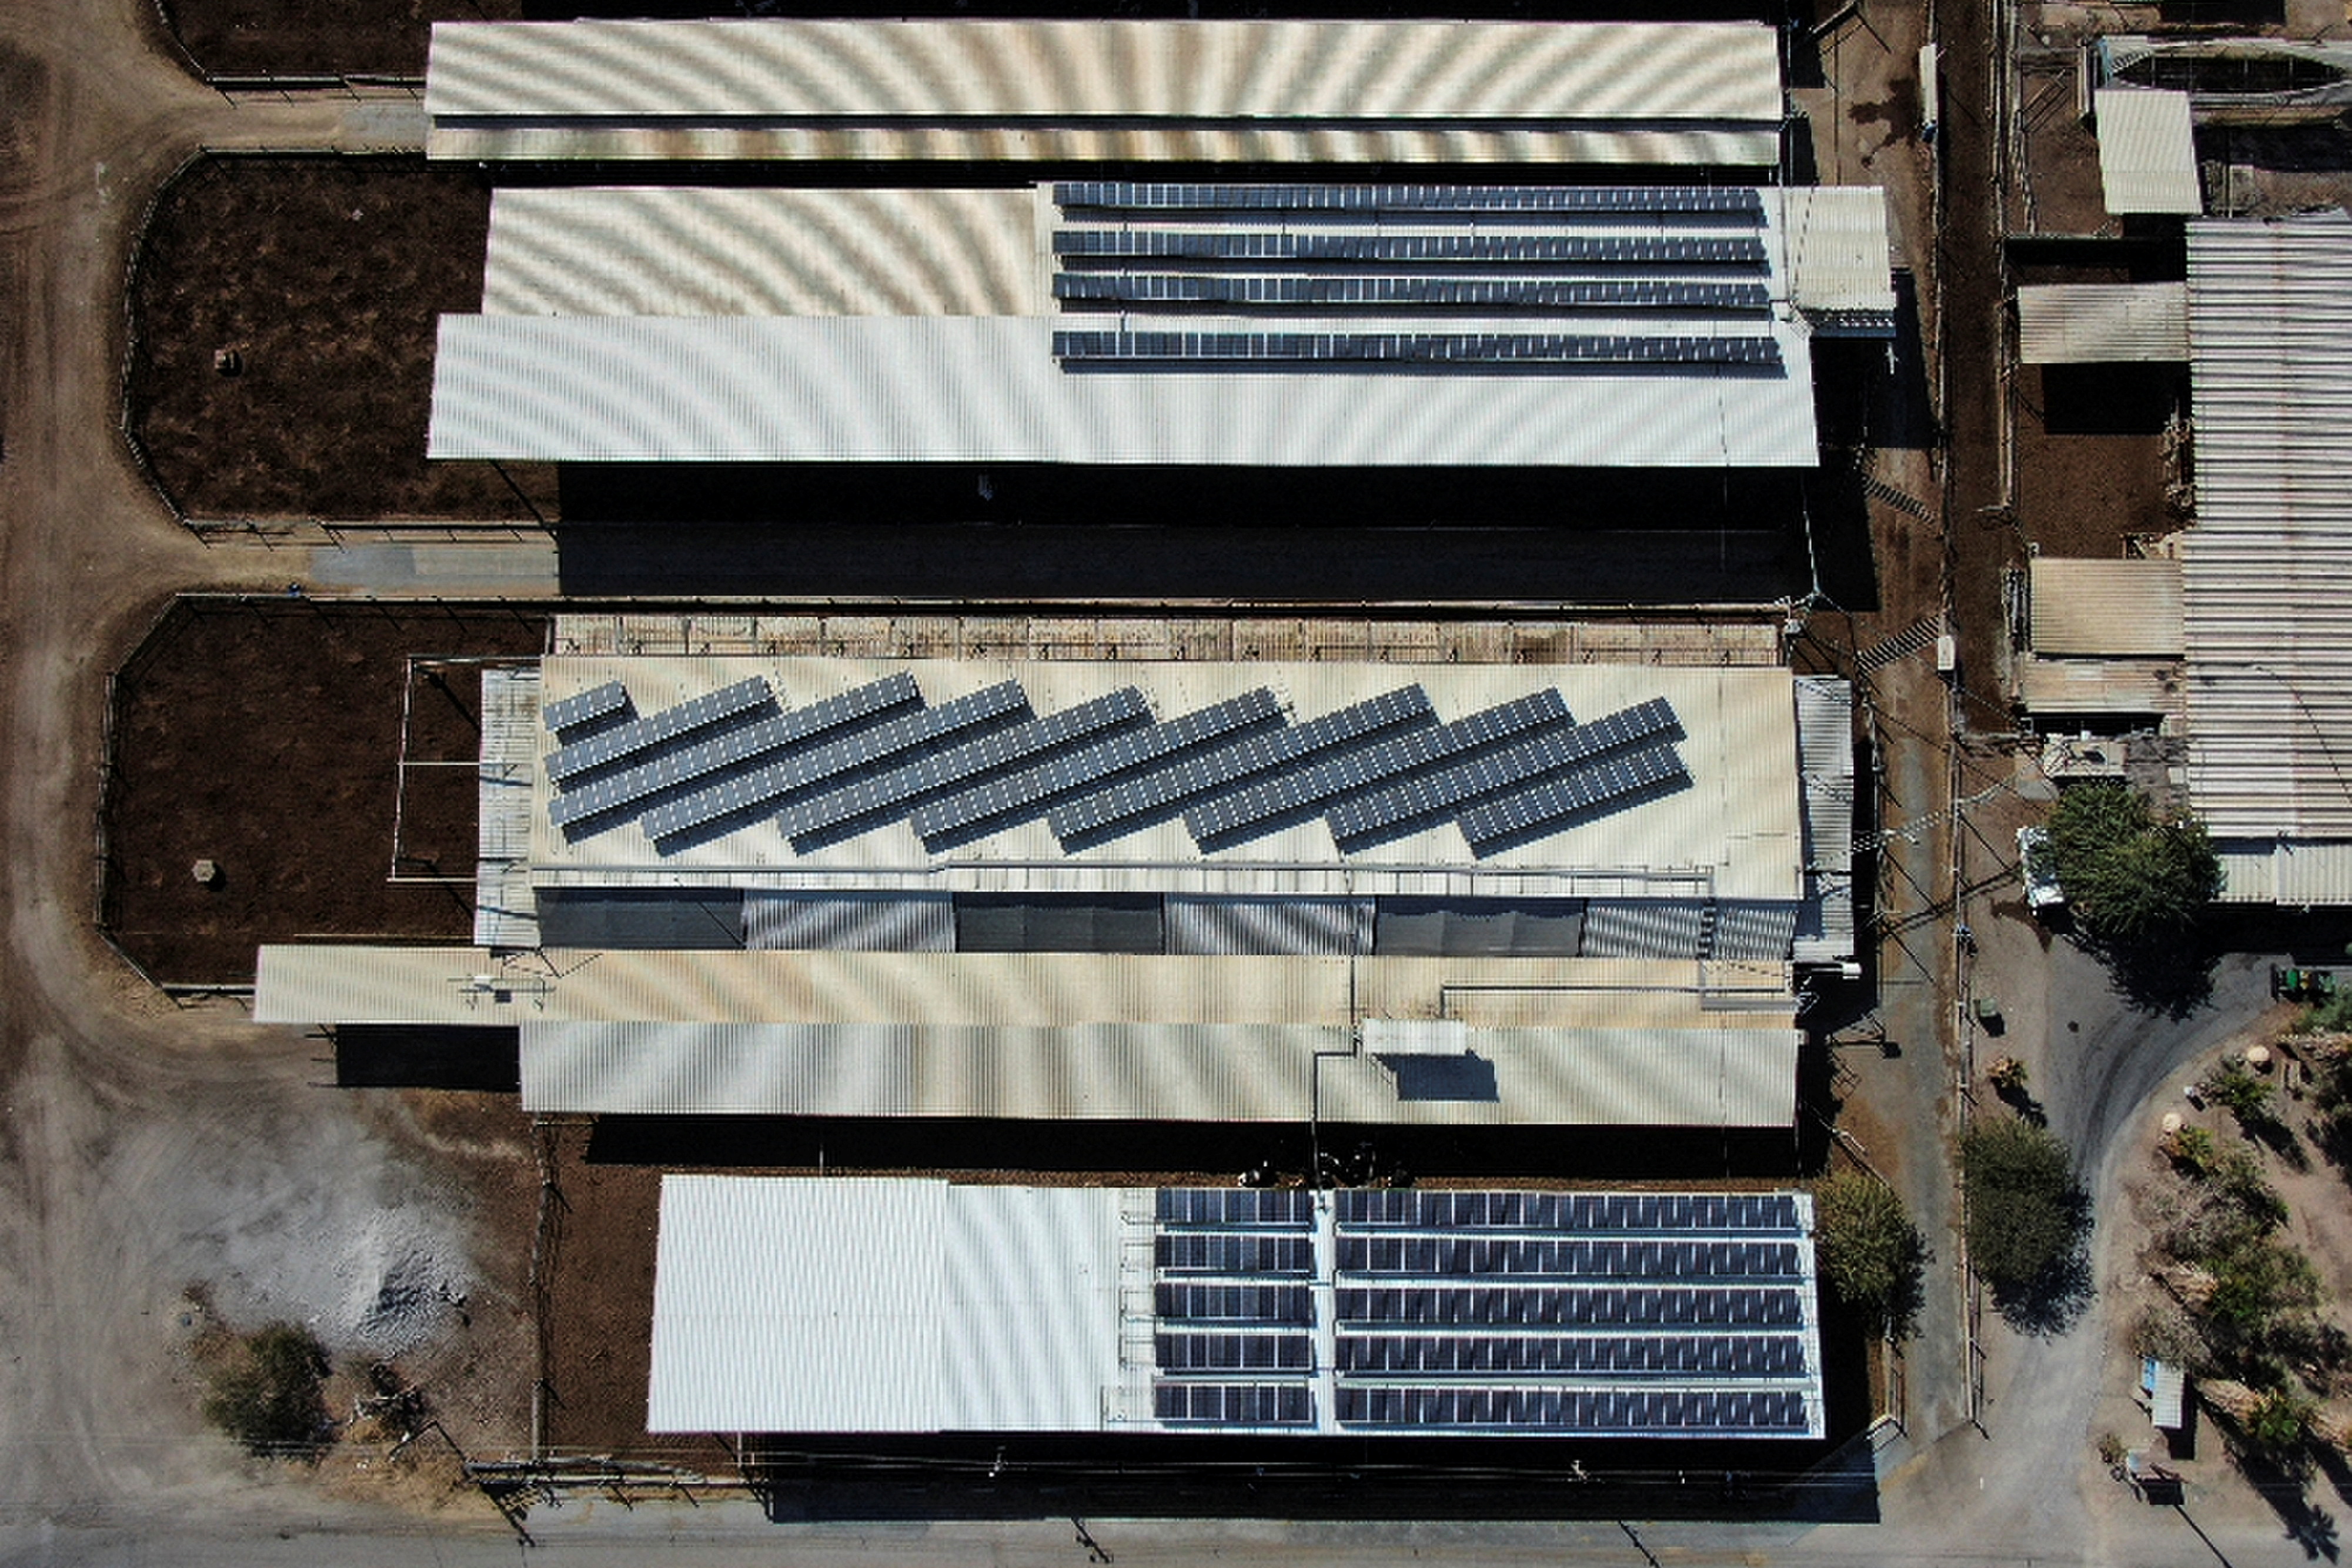 Aerial view of facility providing a new technological solution for storing and producing energy in Kibbutz Yahel, Israel